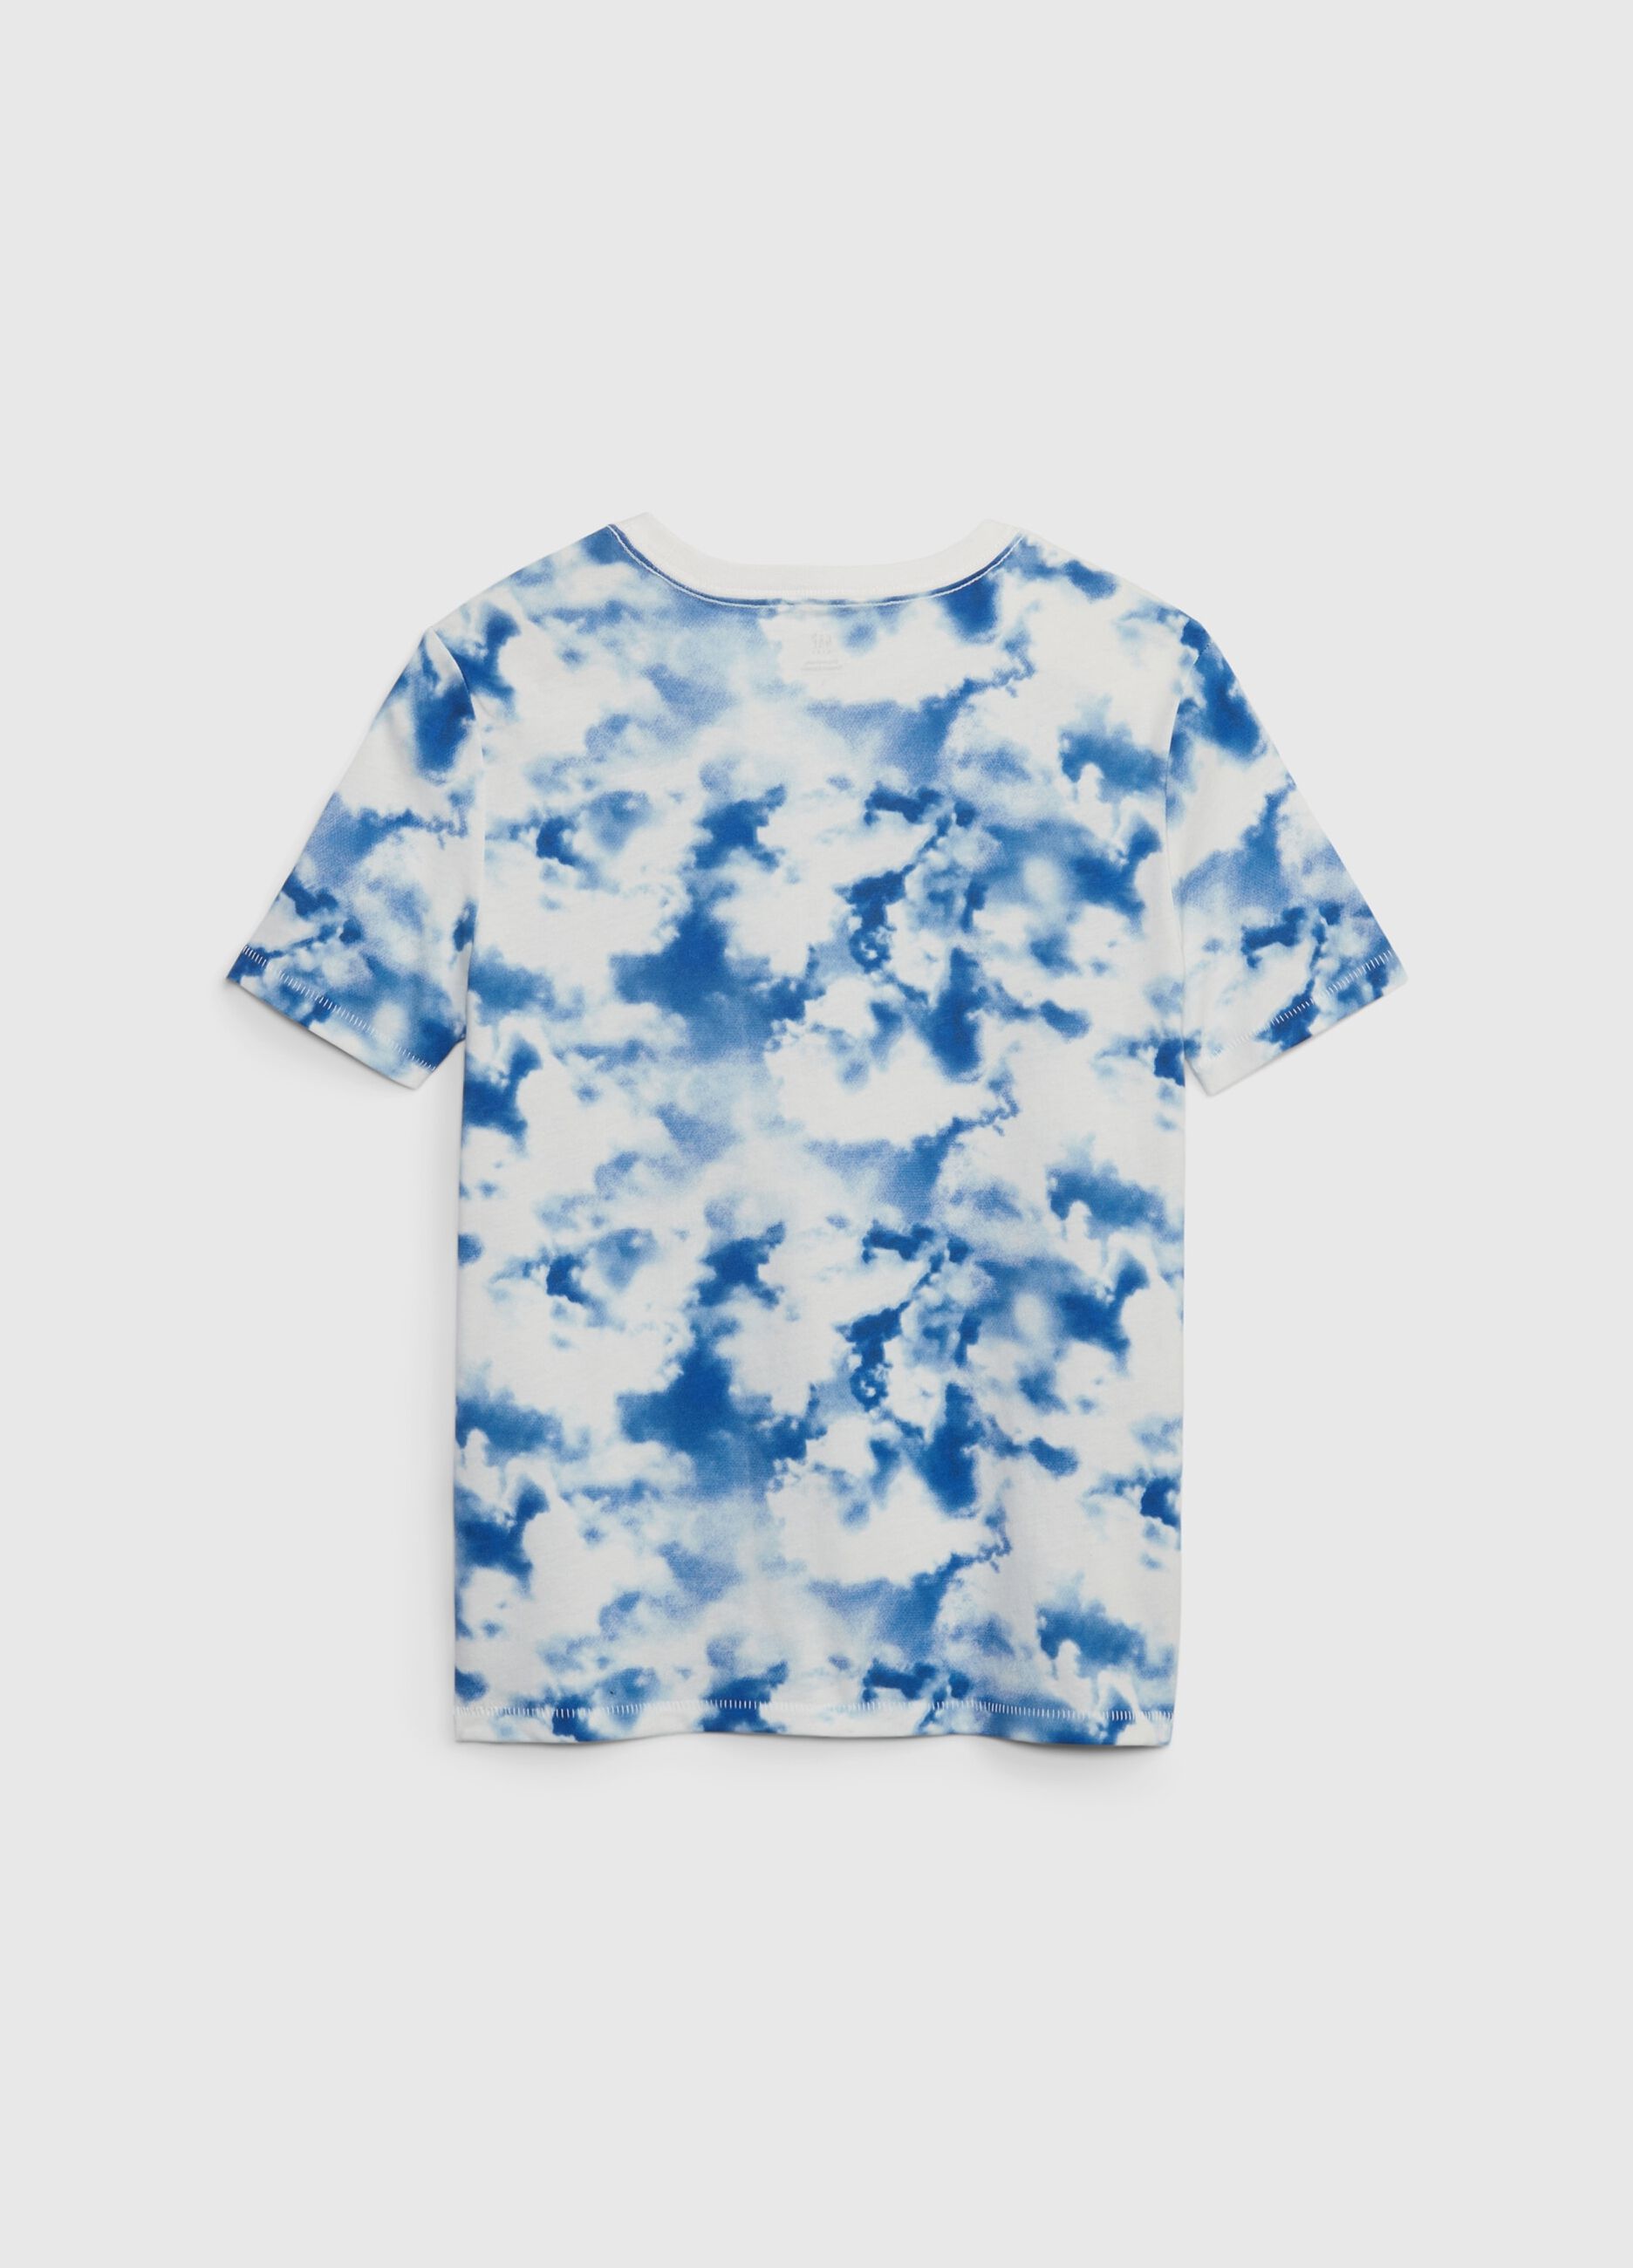 T-shirt in cotton with tie-dye print_1